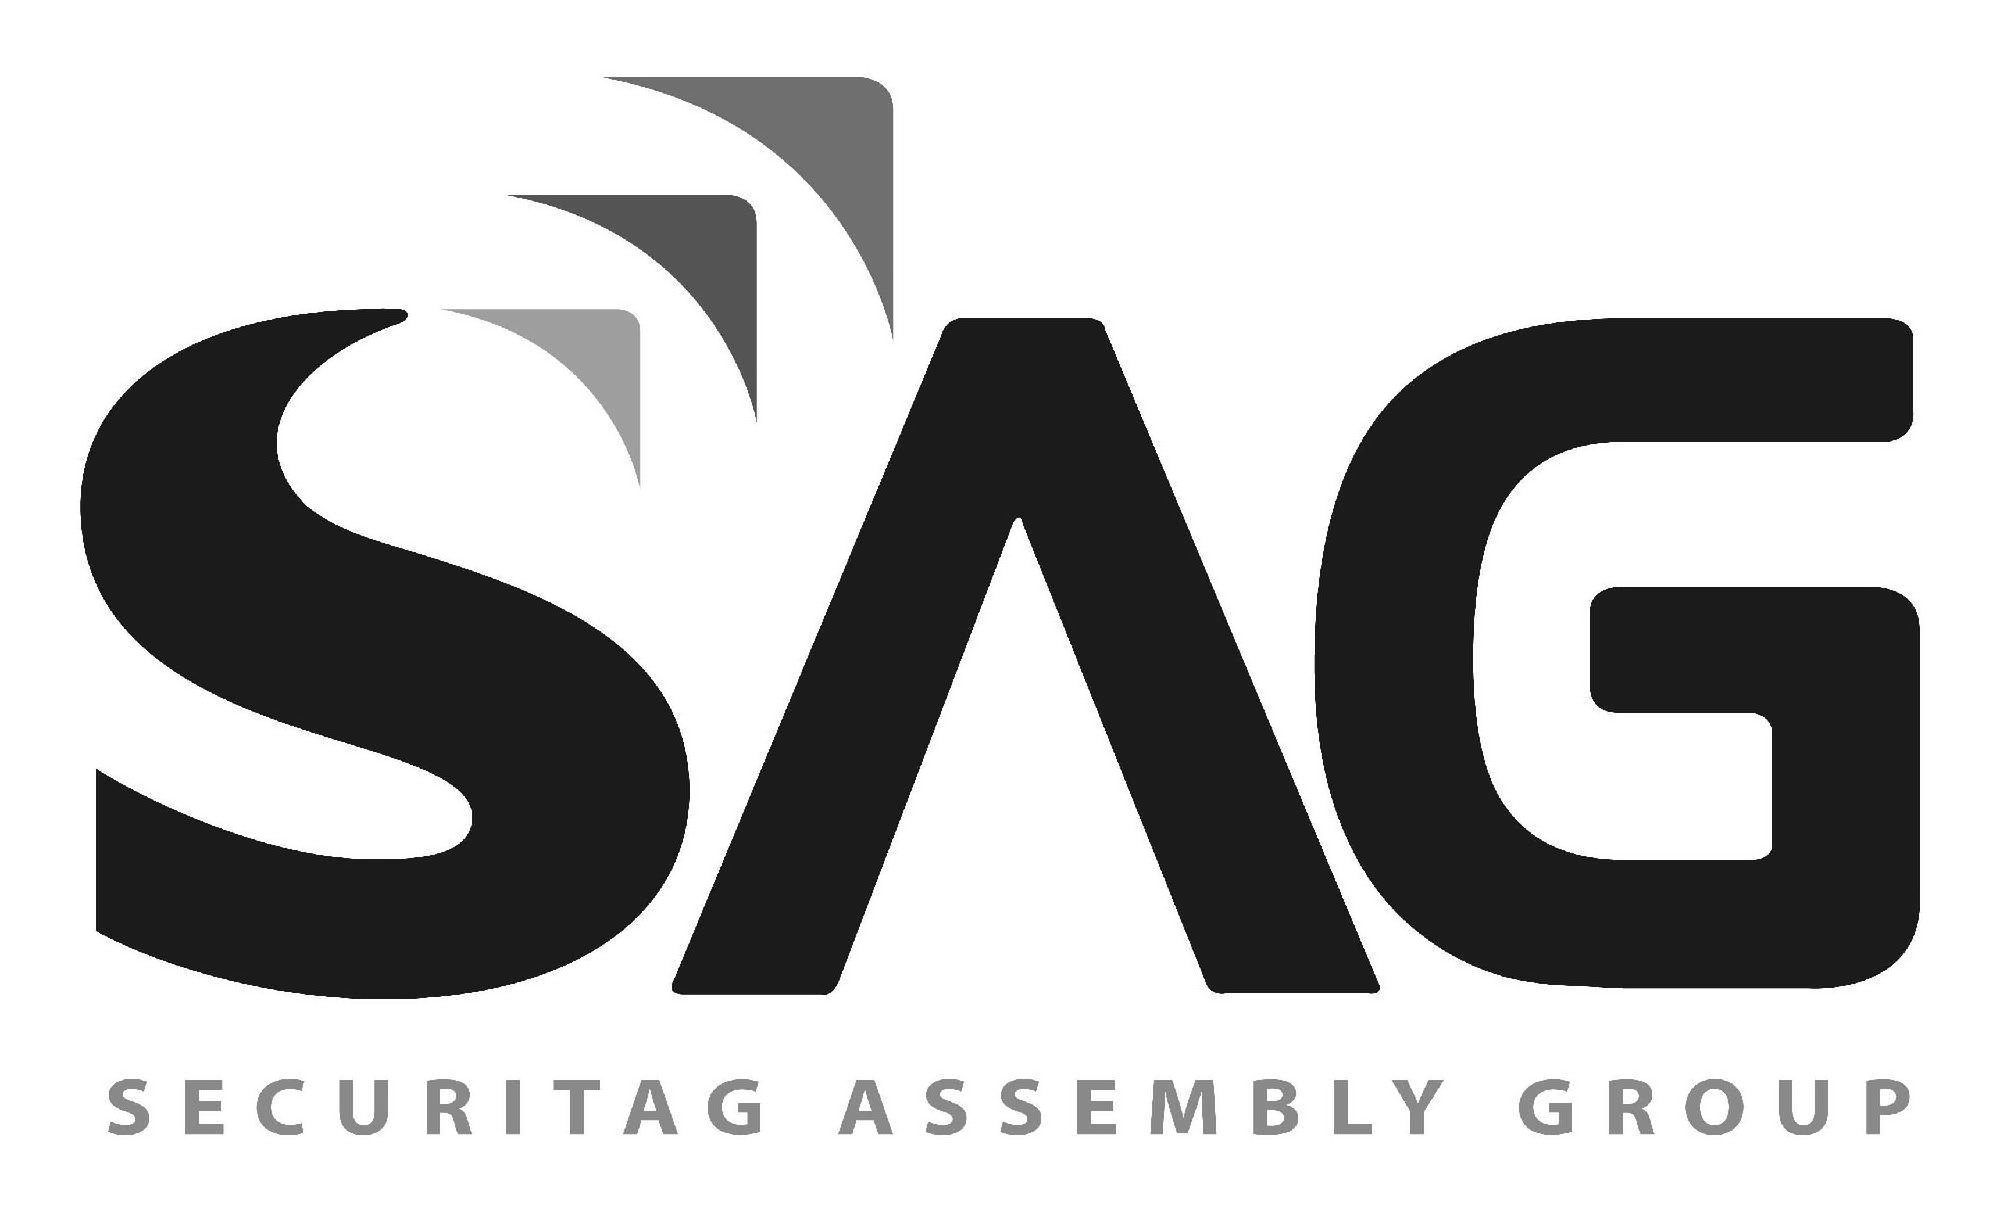  SAG SECURITAG ASSEMBLY GROUP